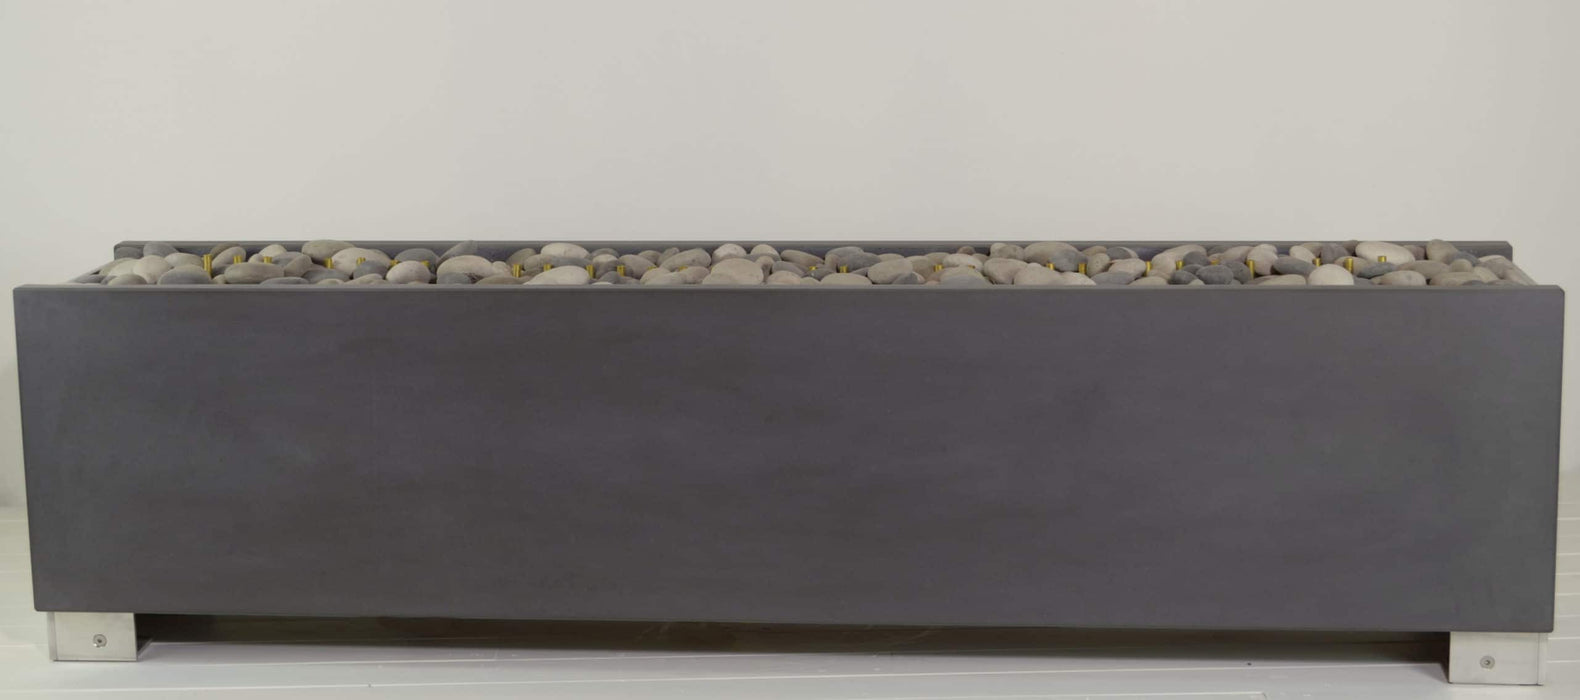 Sleek Single-Stack Solus Decor Linear Fire Pit with Stone Filling.